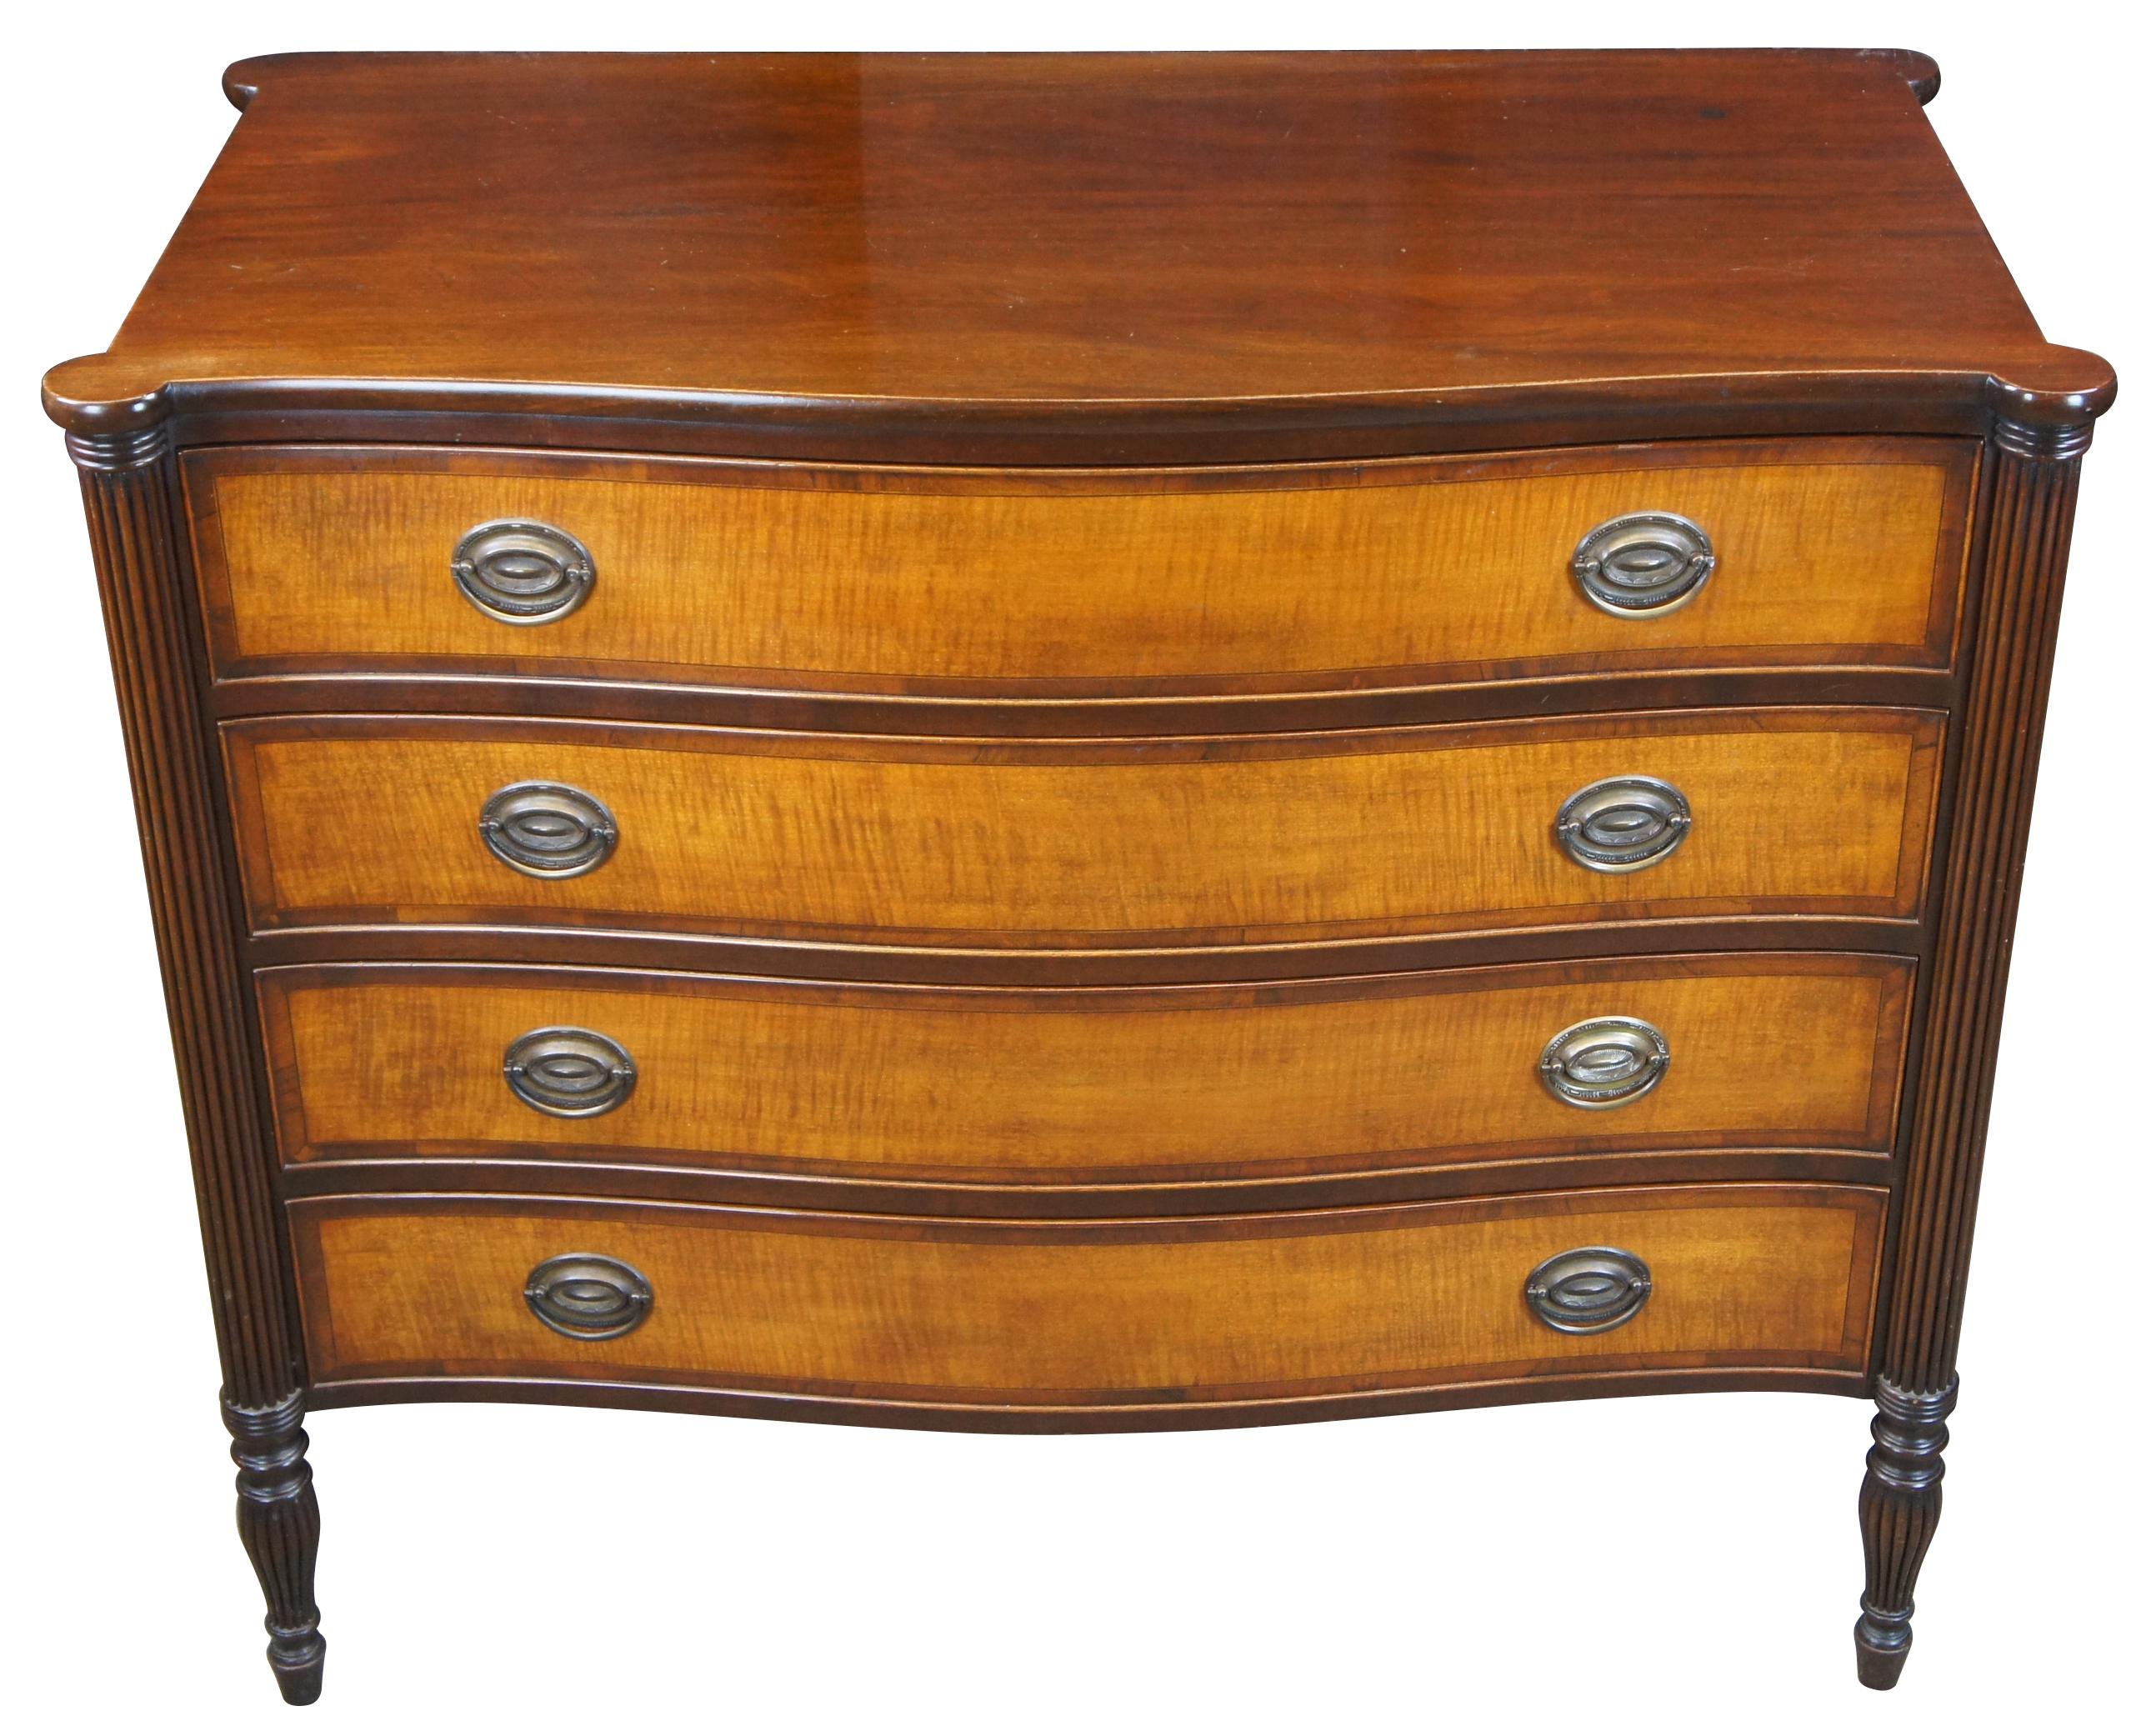 Antique American Federal or Sheraton serpentine chest of drawers, circa second quarter 20th century. Made from mahogany with turret reeded stiles, turnip turned legs and inlaid birch flamed drawers.
 